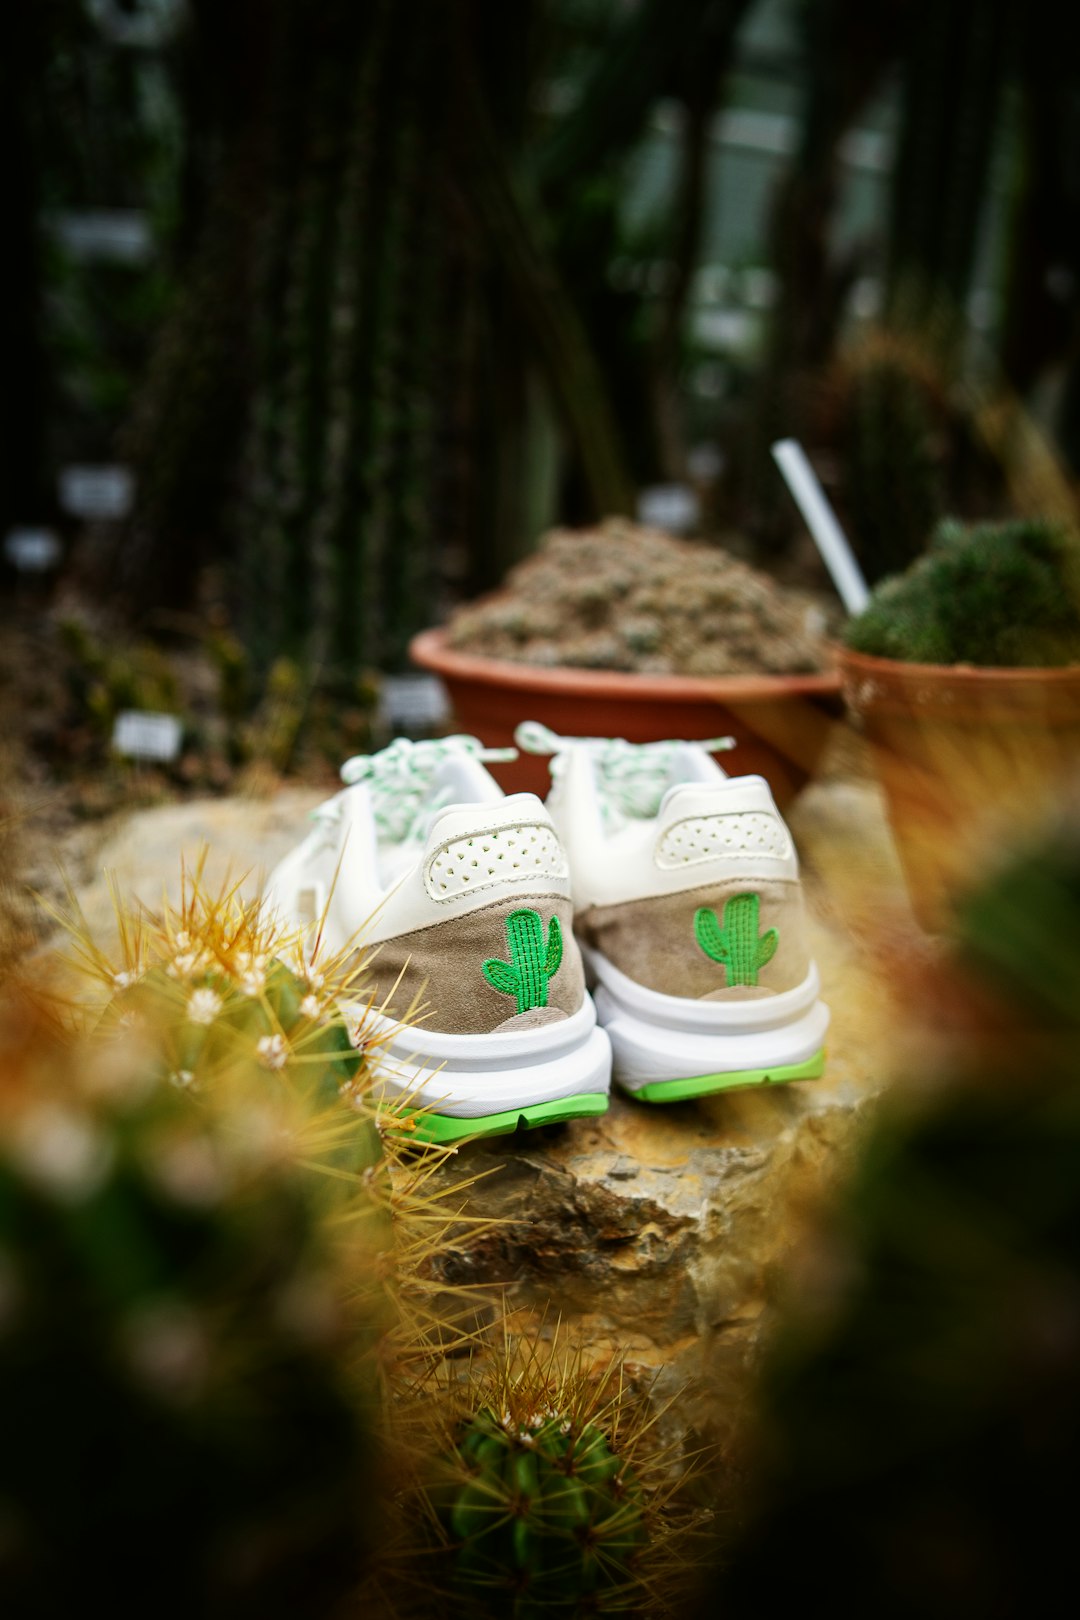 white and green sneakers on brown dried leaves